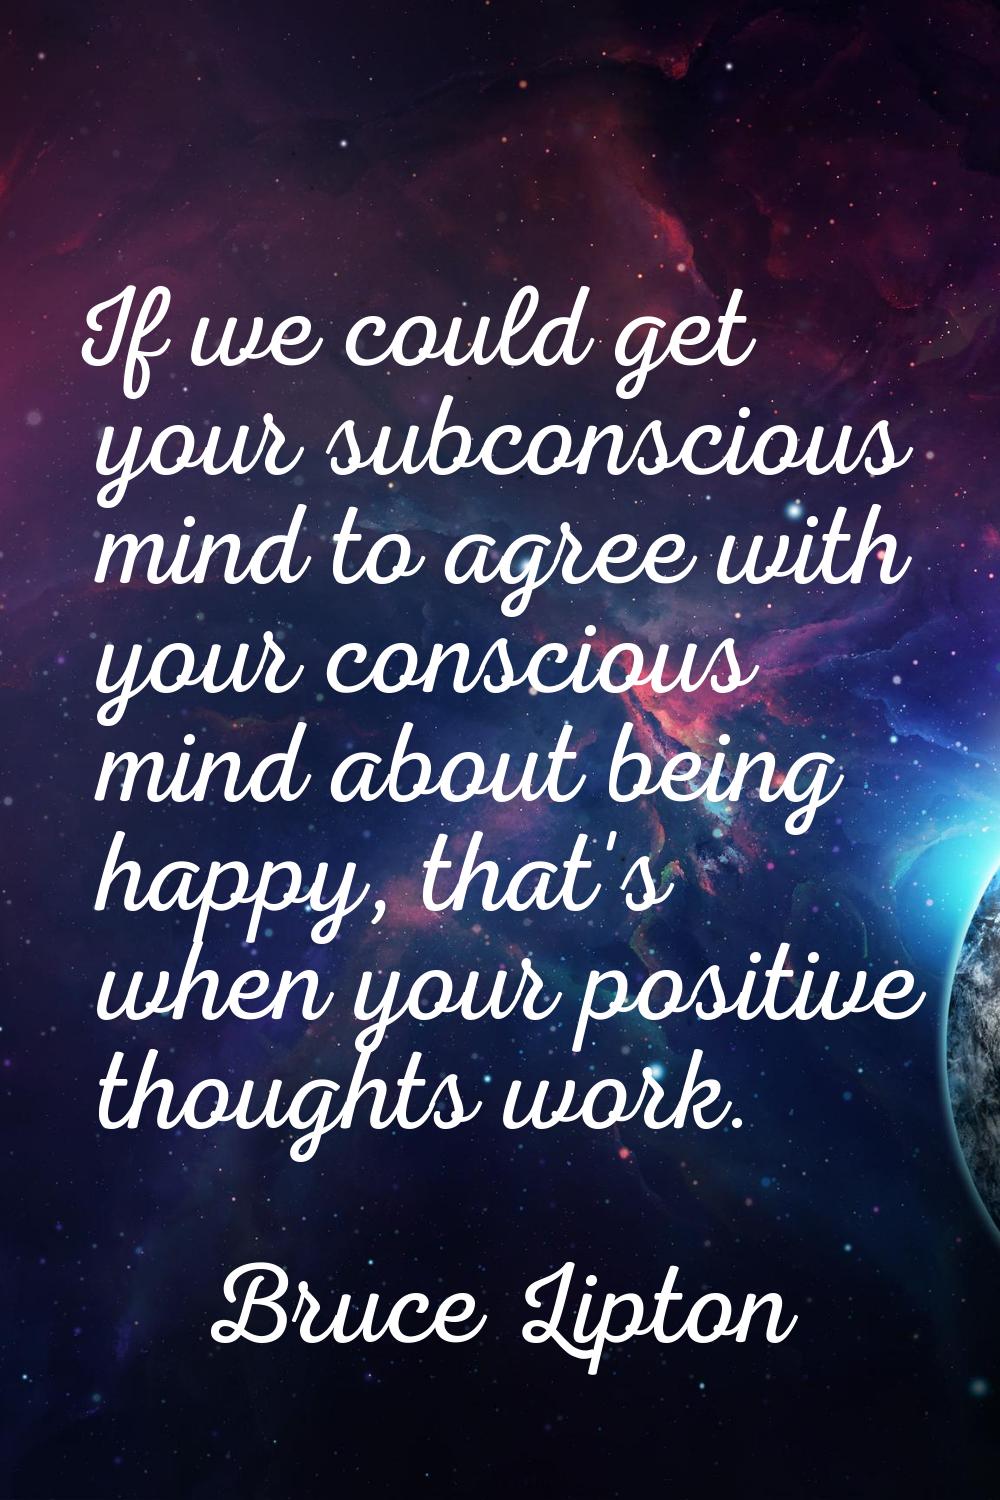 If we could get your subconscious mind to agree with your conscious mind about being happy, that's 